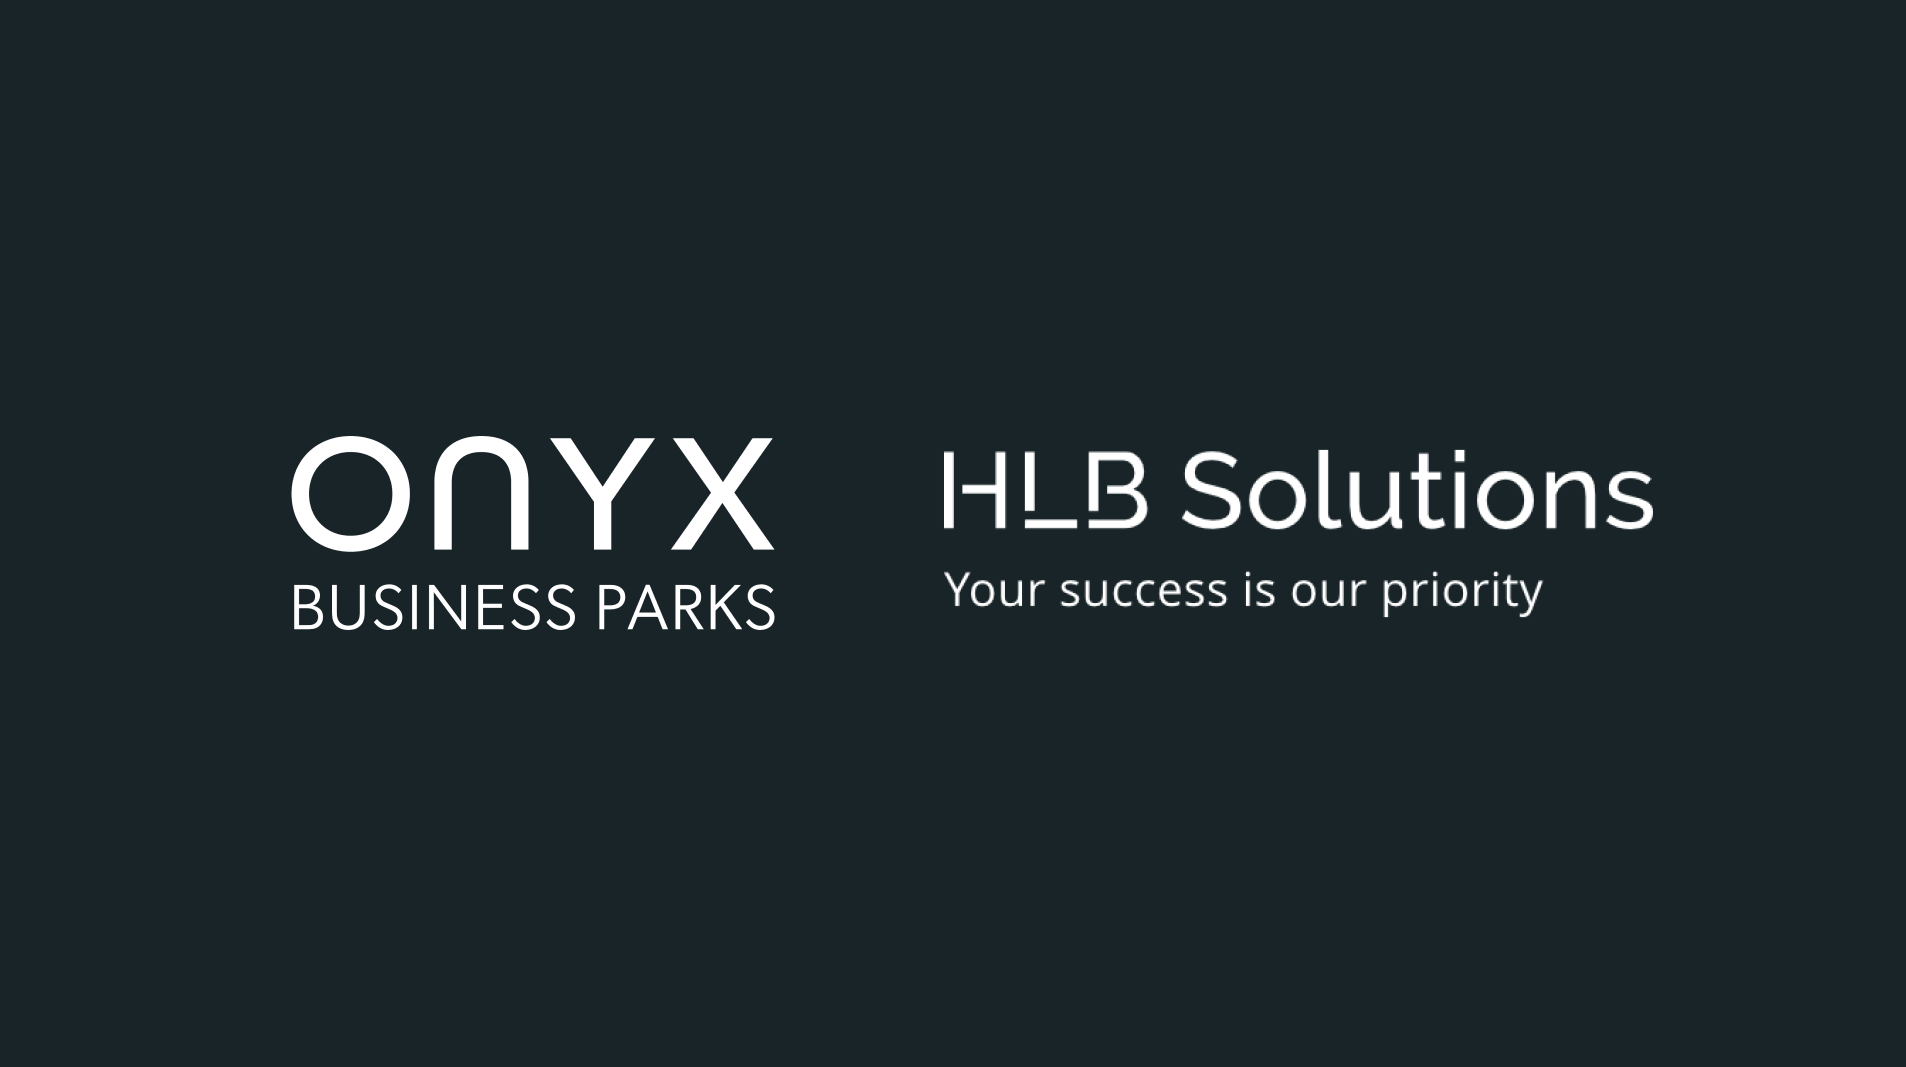 Image with a dark background, with the logo for Onyx business parks, and HLB Solutions next to each other.